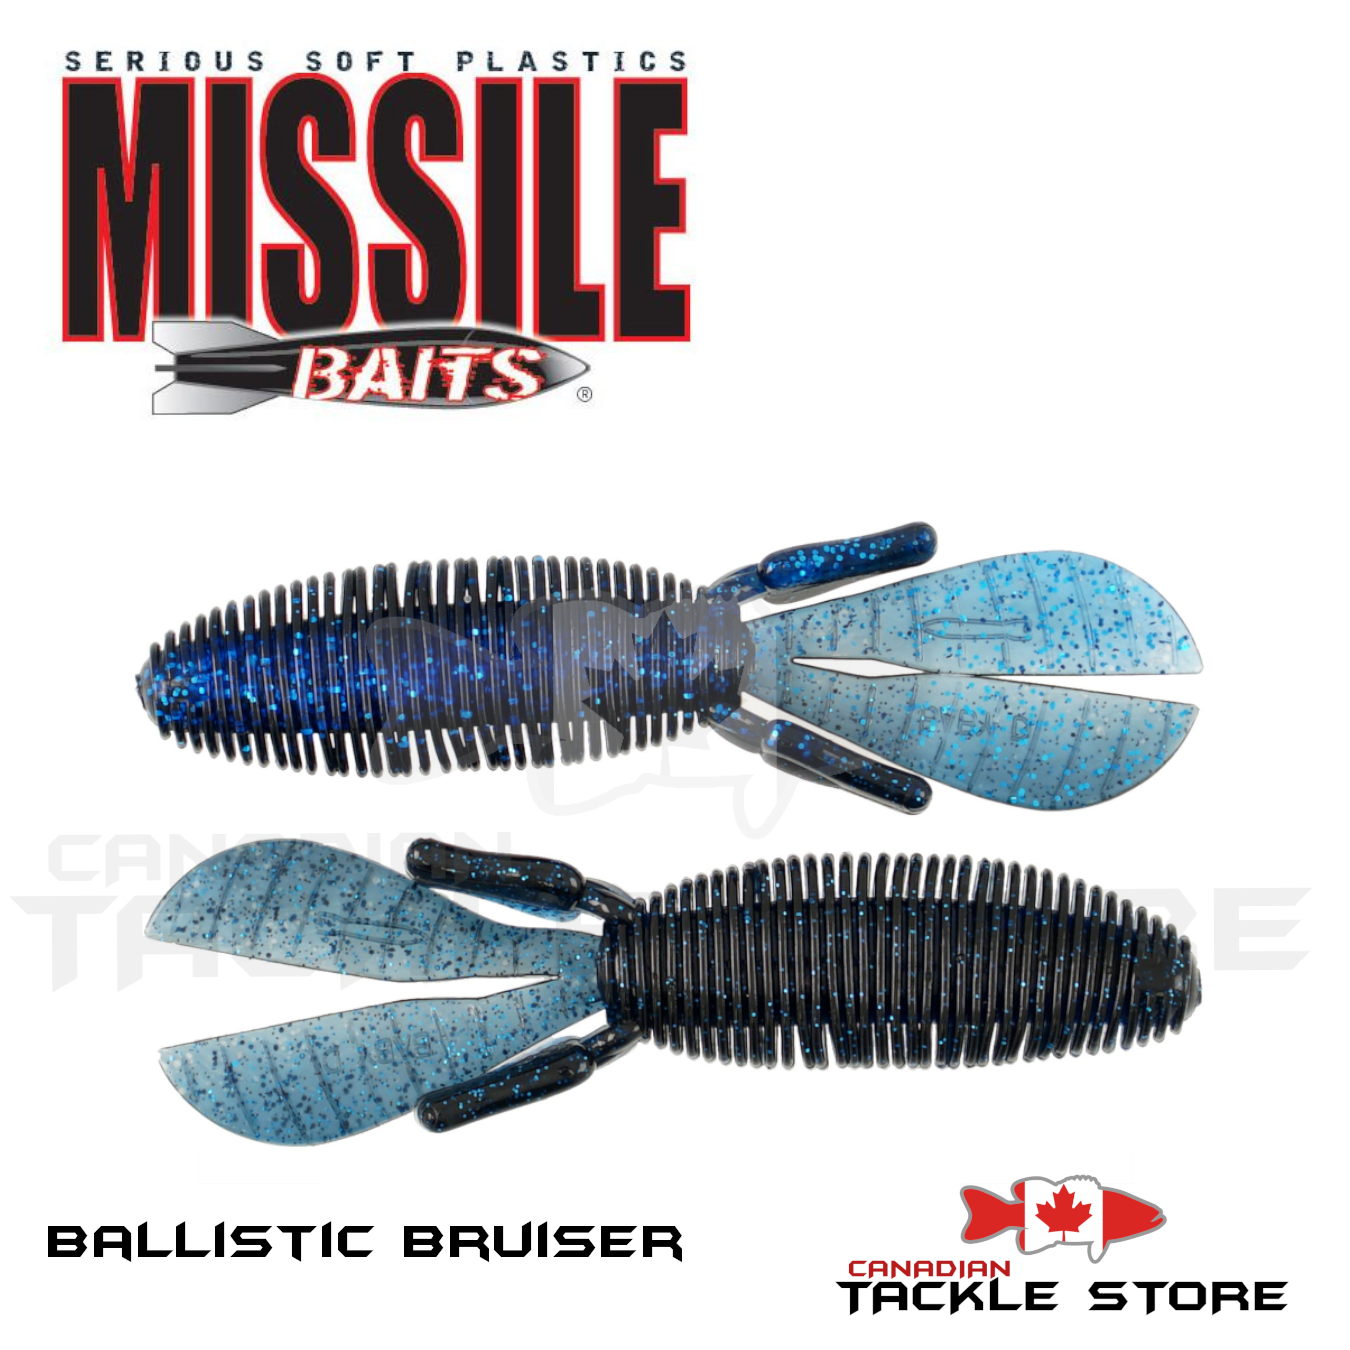 Missile Baits The 48 Worm Bruiser Flash